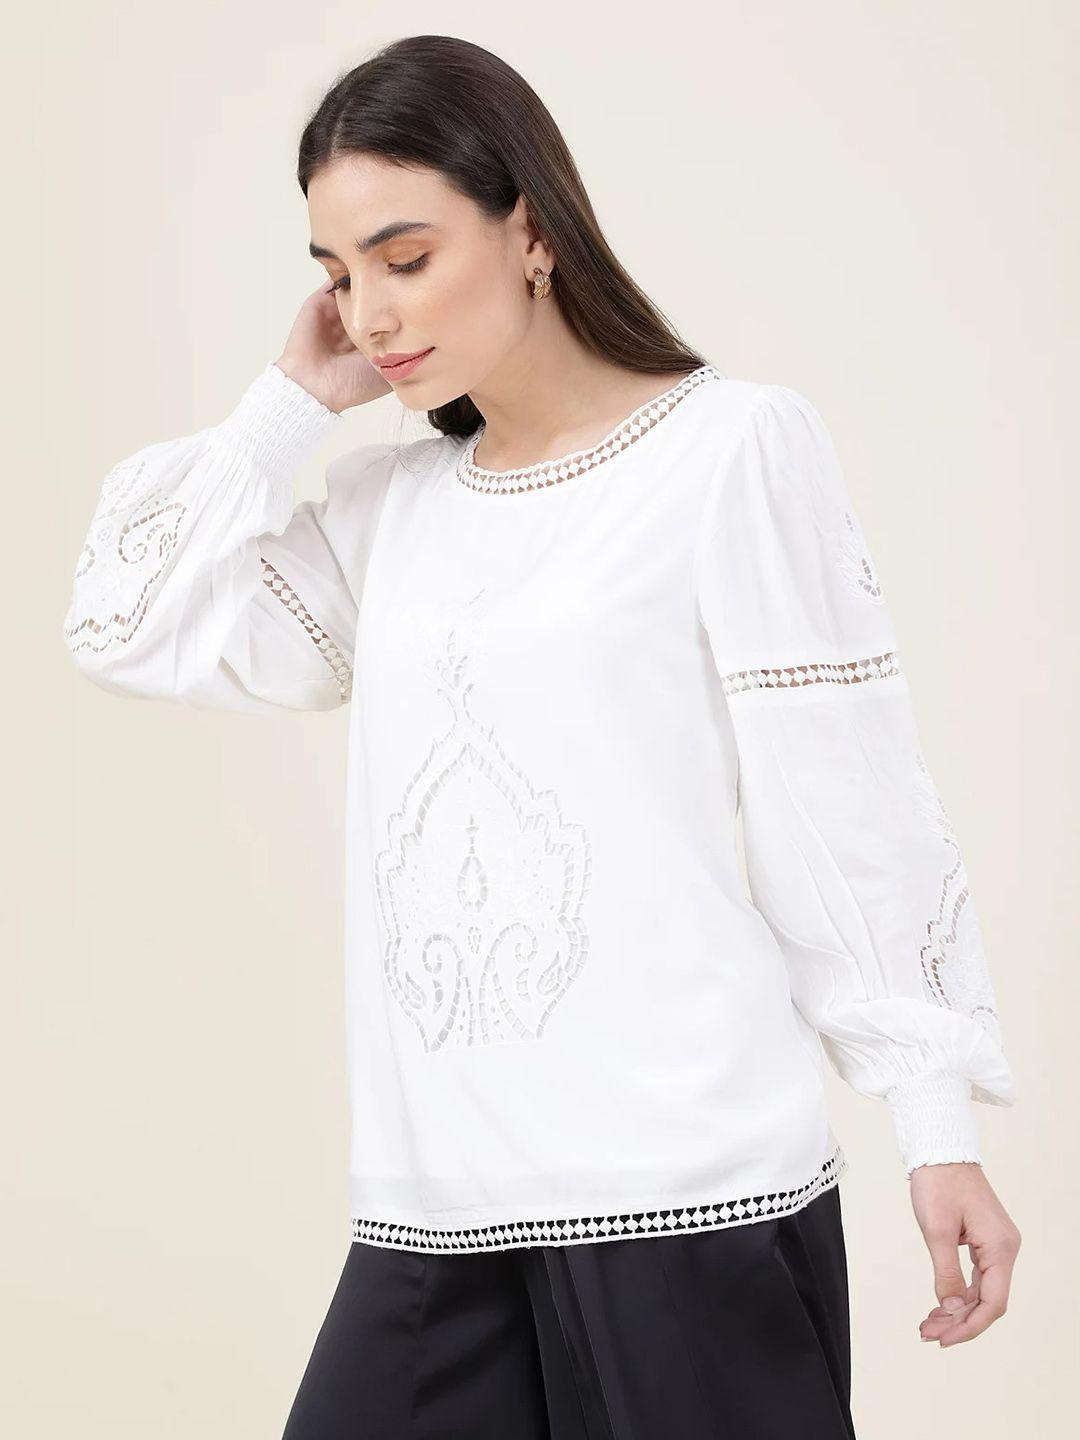 marks & spencer women white embroidered bishop sleeves top